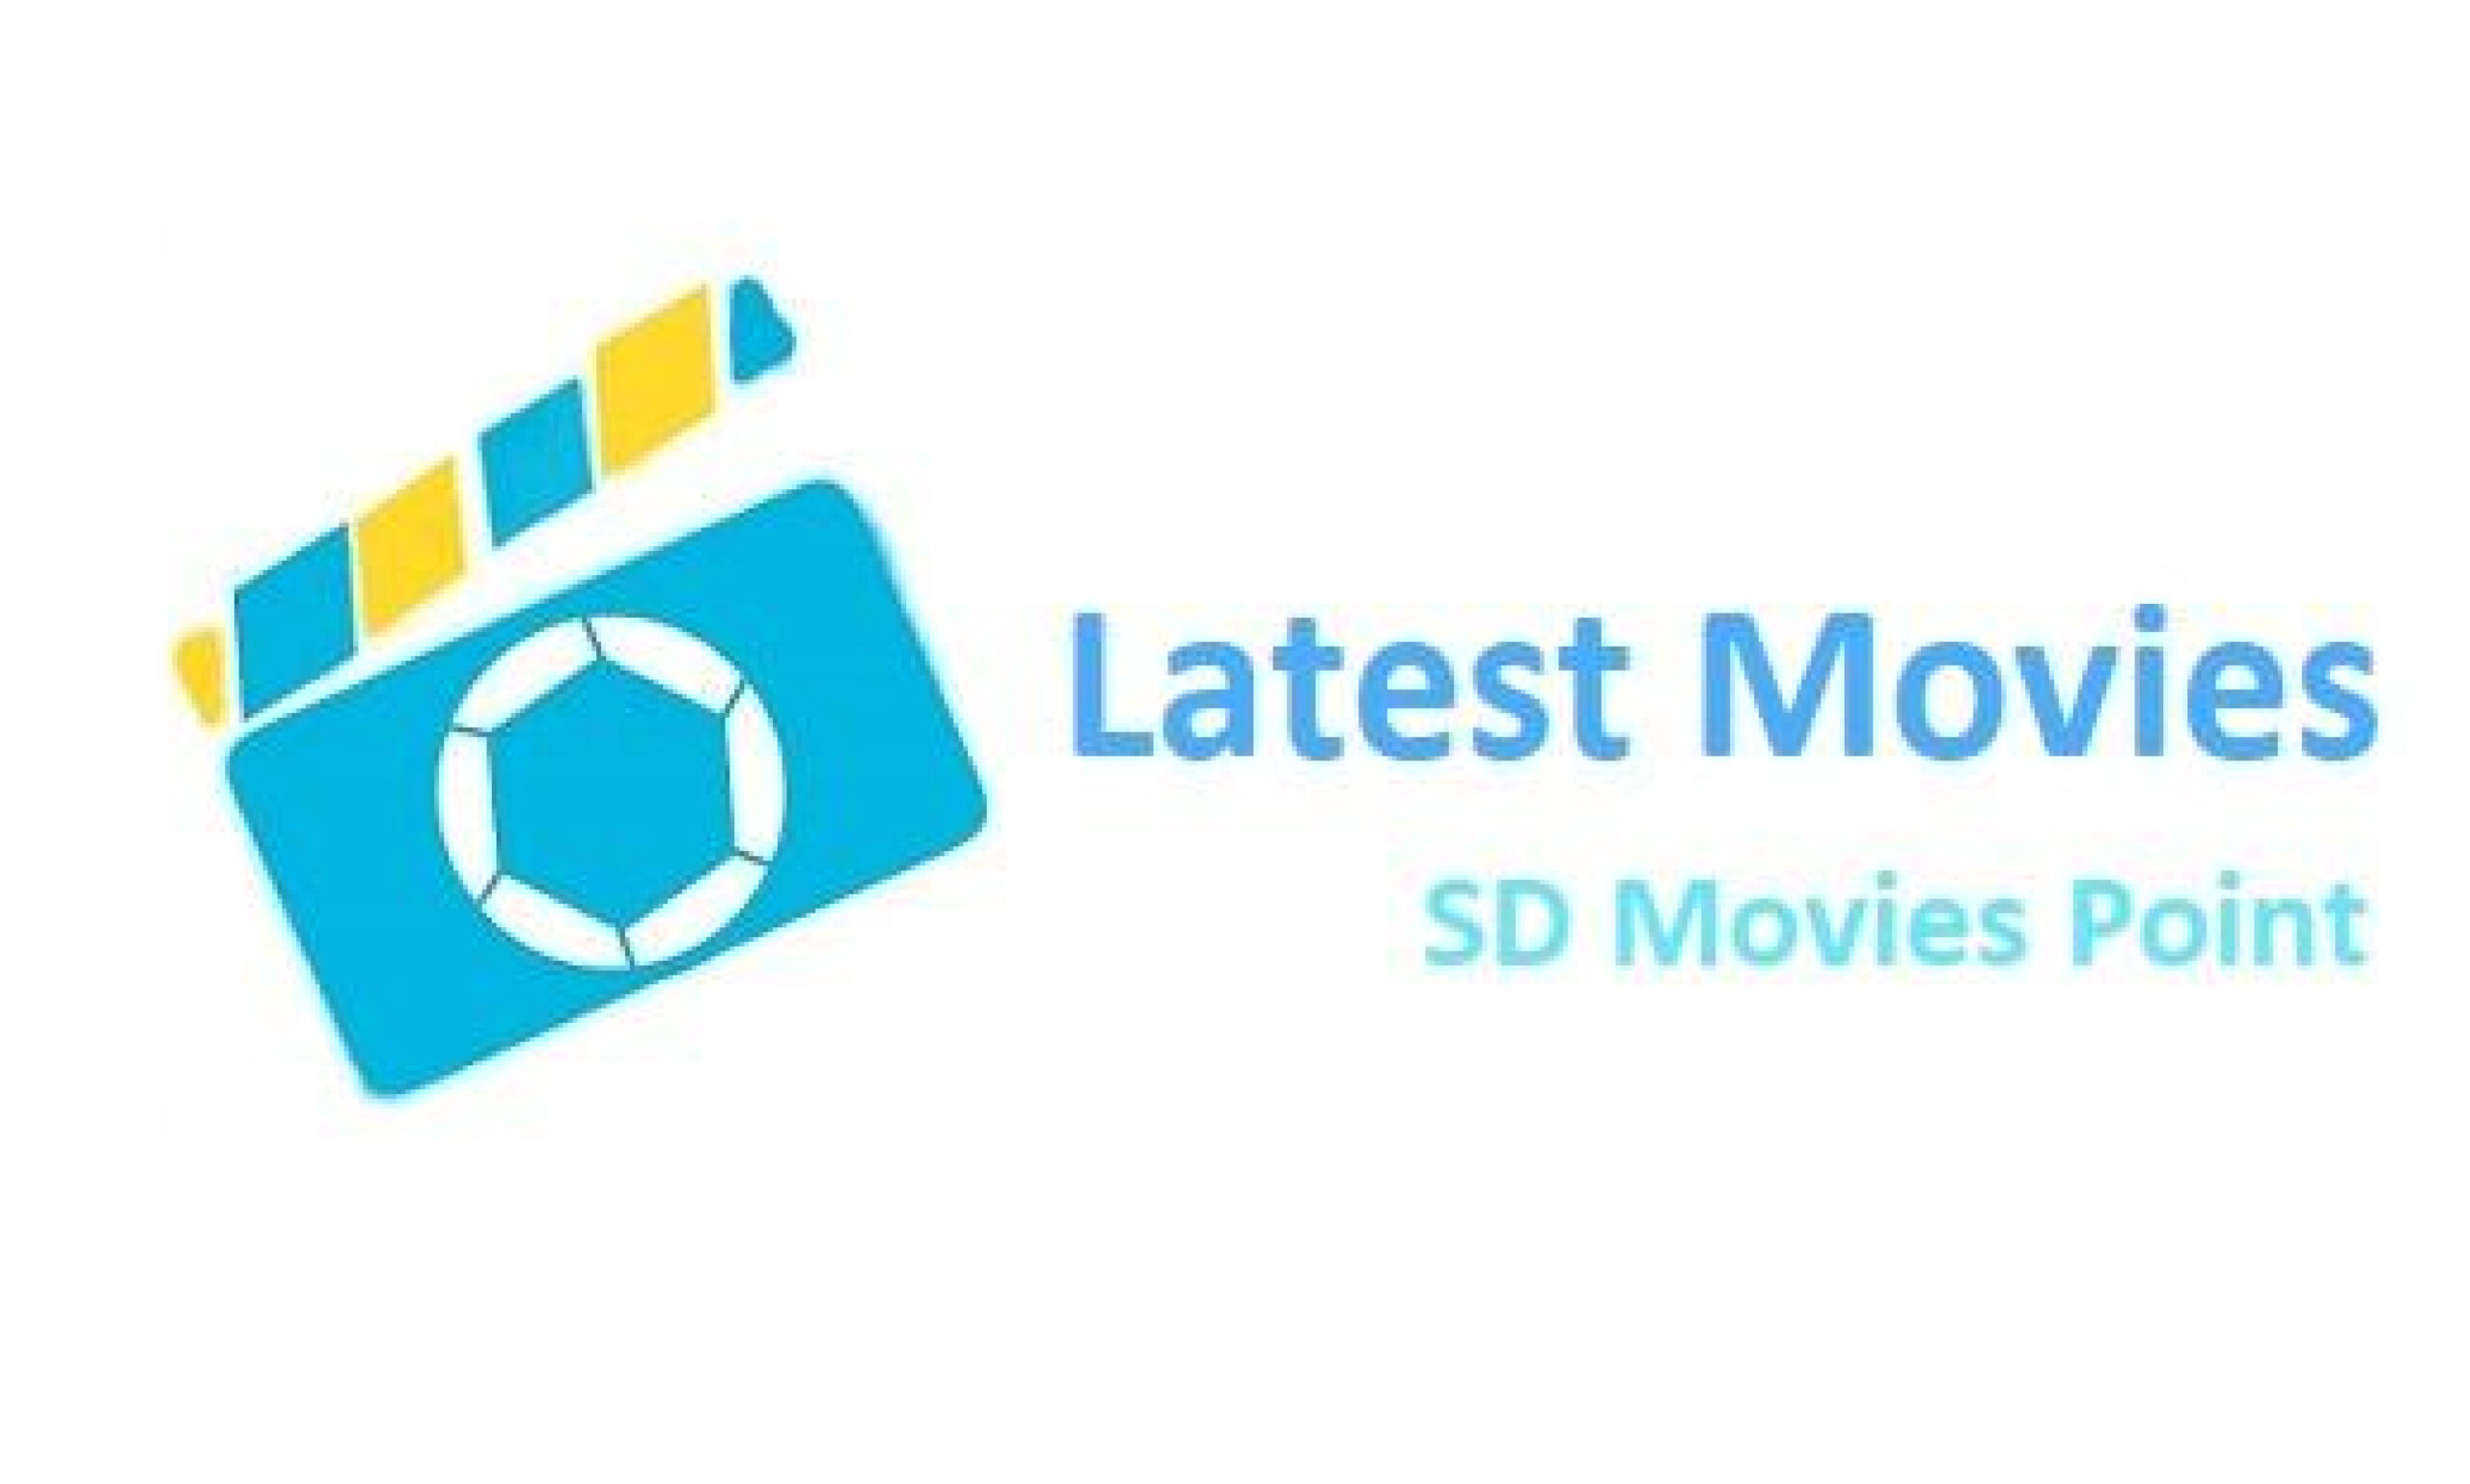 SD movies point